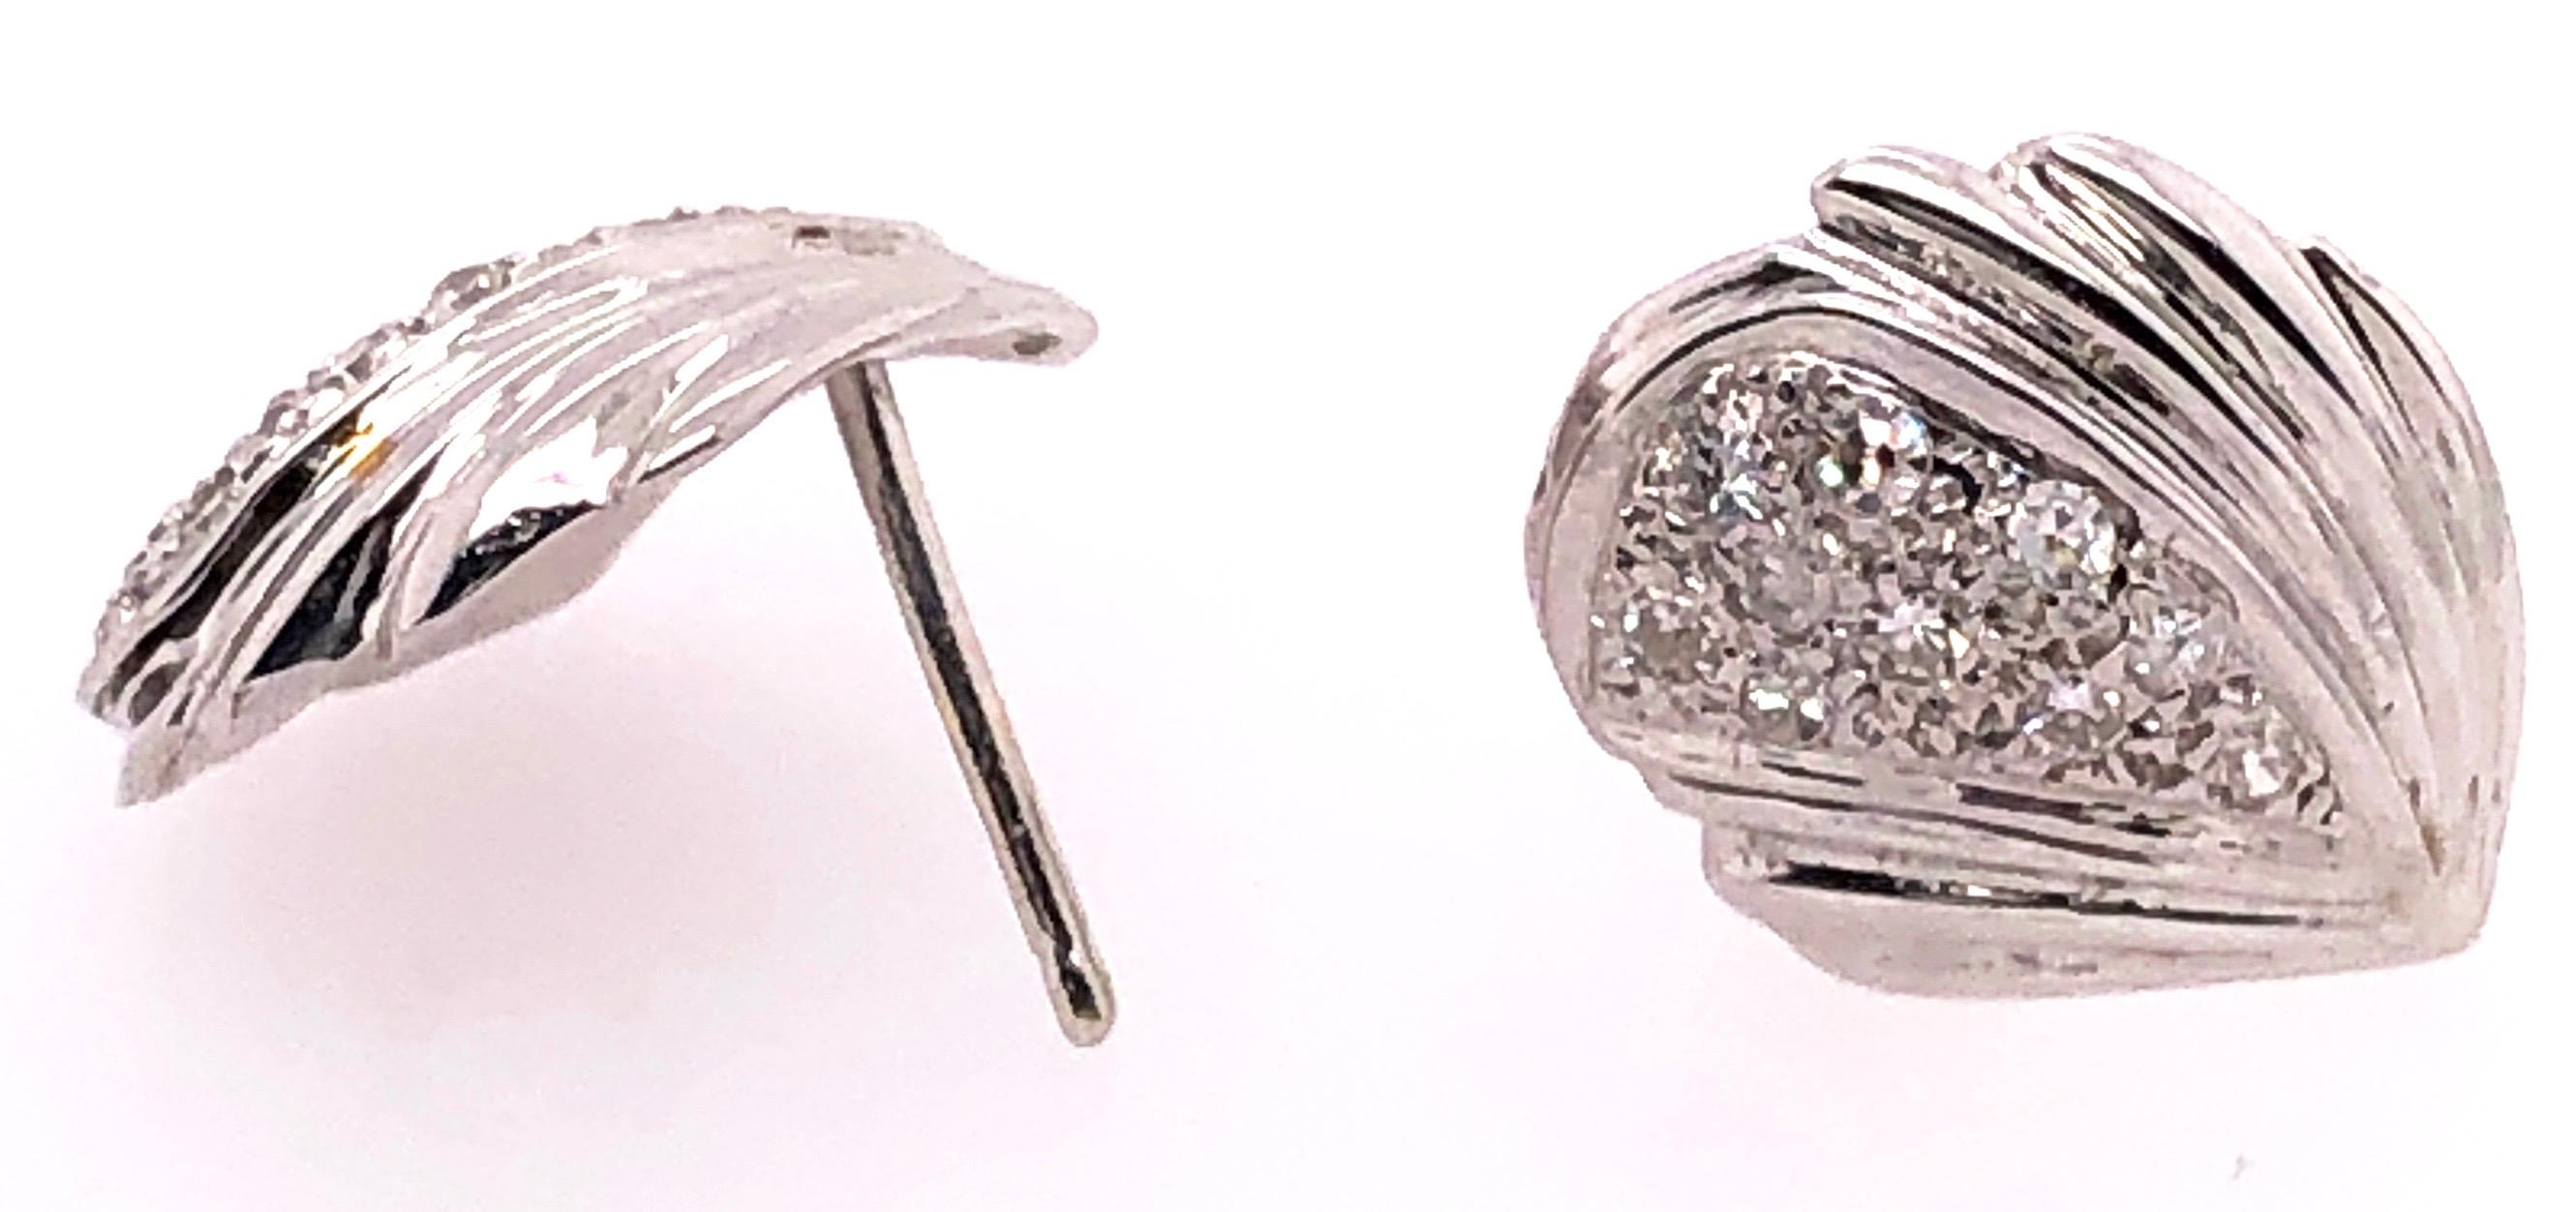 14 Karat White Gold Button Earrings with Diamonds 0.50 Total Diamond Weight.
4.38 grams total weight.